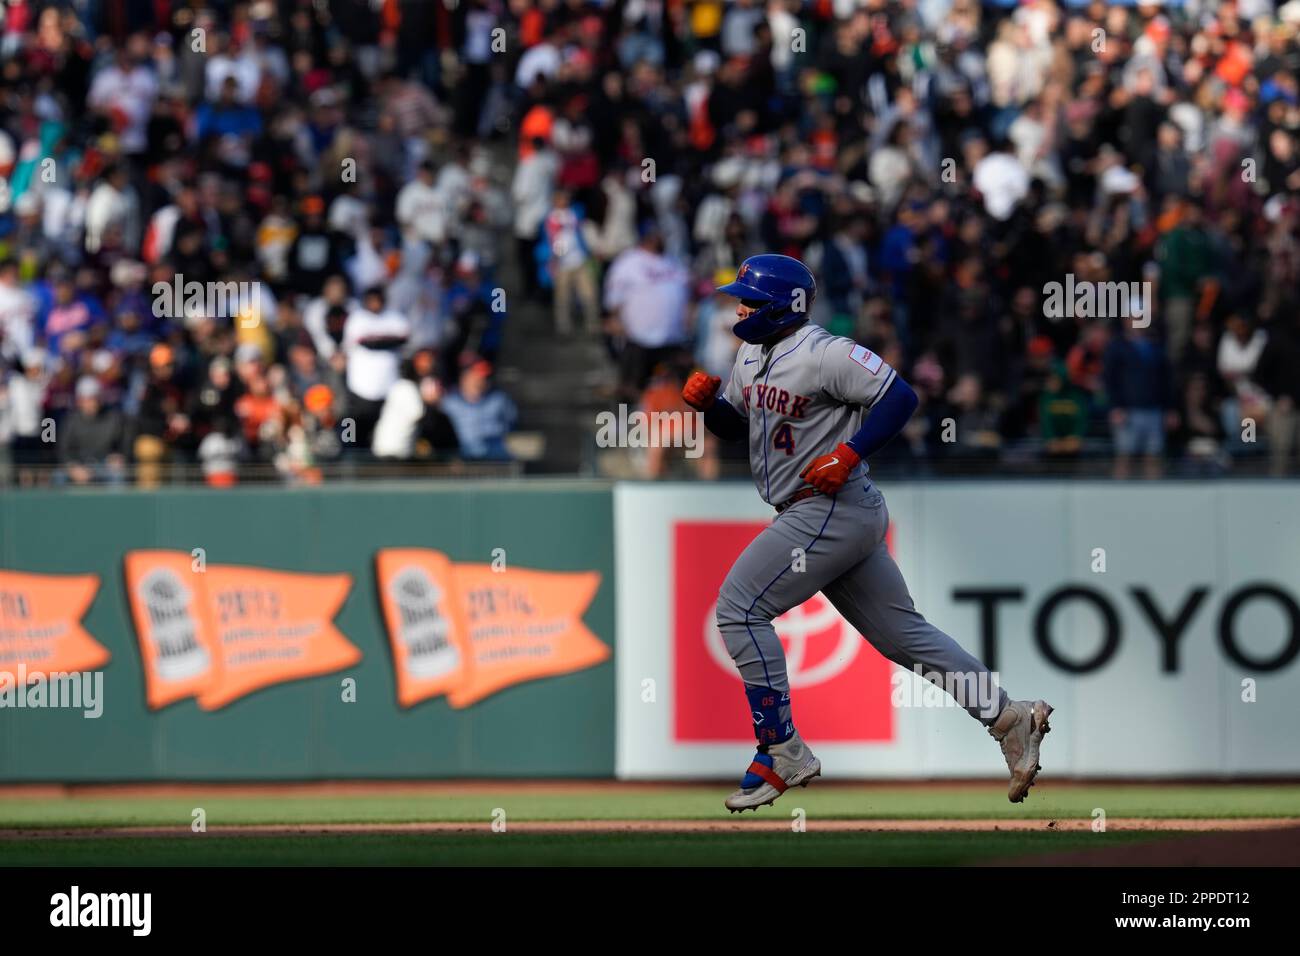 WASHINGTON, DC - SEPTEMBER 27: New York Mets second baseman Luis Guillorme  (13) twirls his glove between pitches during the New York Mets versus the  Washington Nationals on September 27, 2020 at 